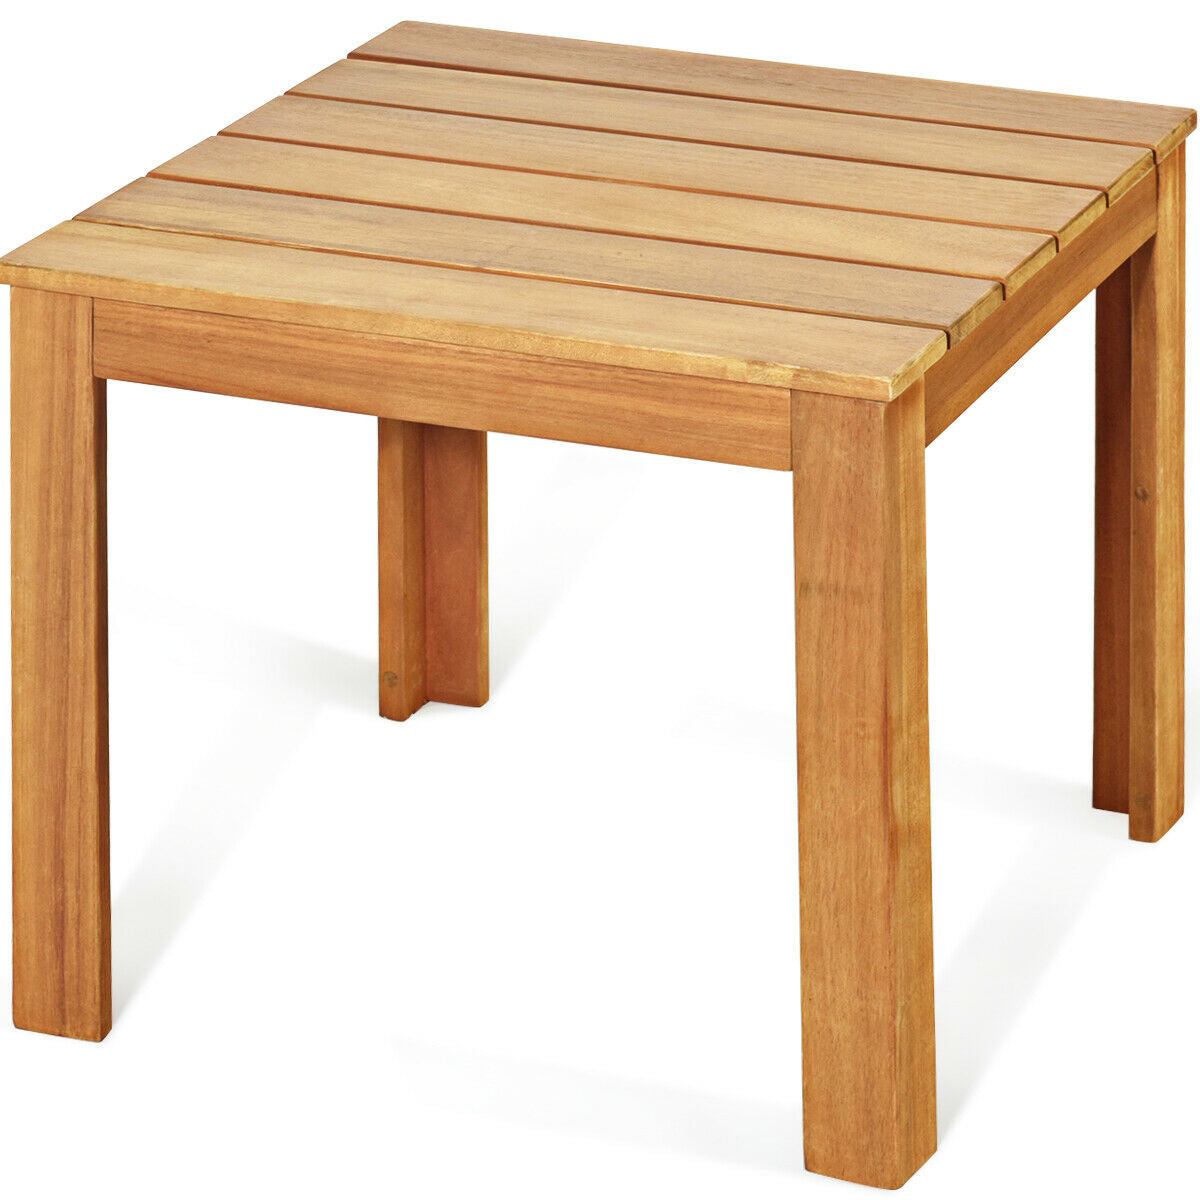 Wooden Square Patio Coffee Bistro Table - Gallery View 8 of 12